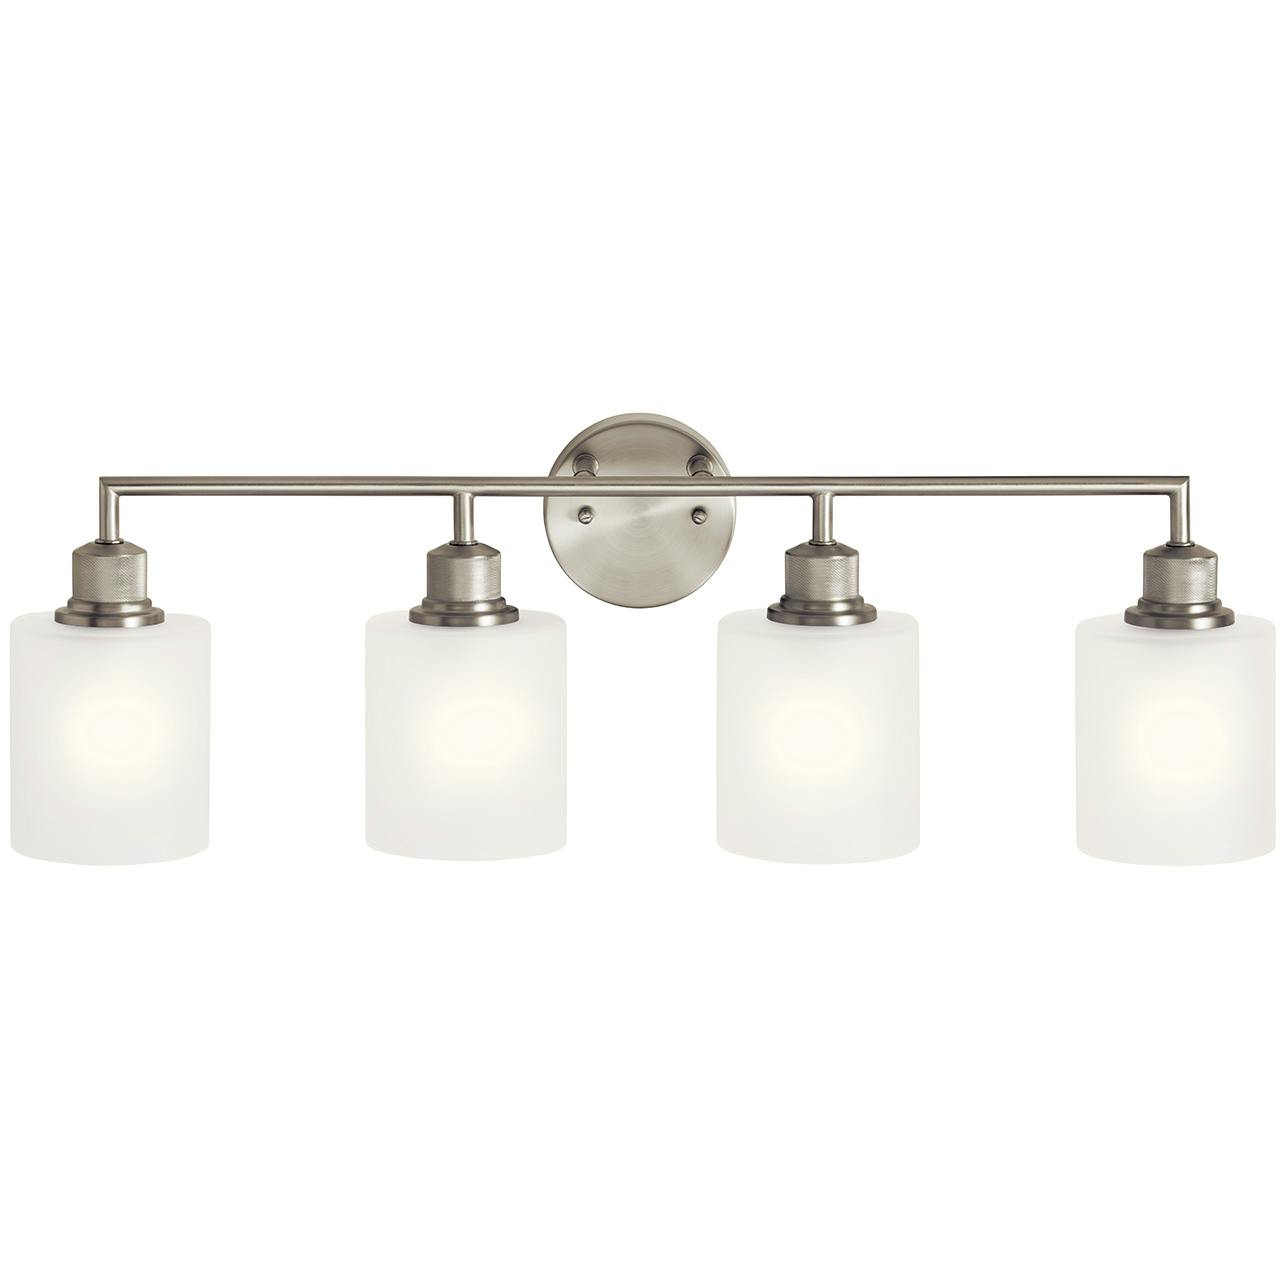 The Lynn Haven 4 Light Vanity Light Nickel facing down on a white background